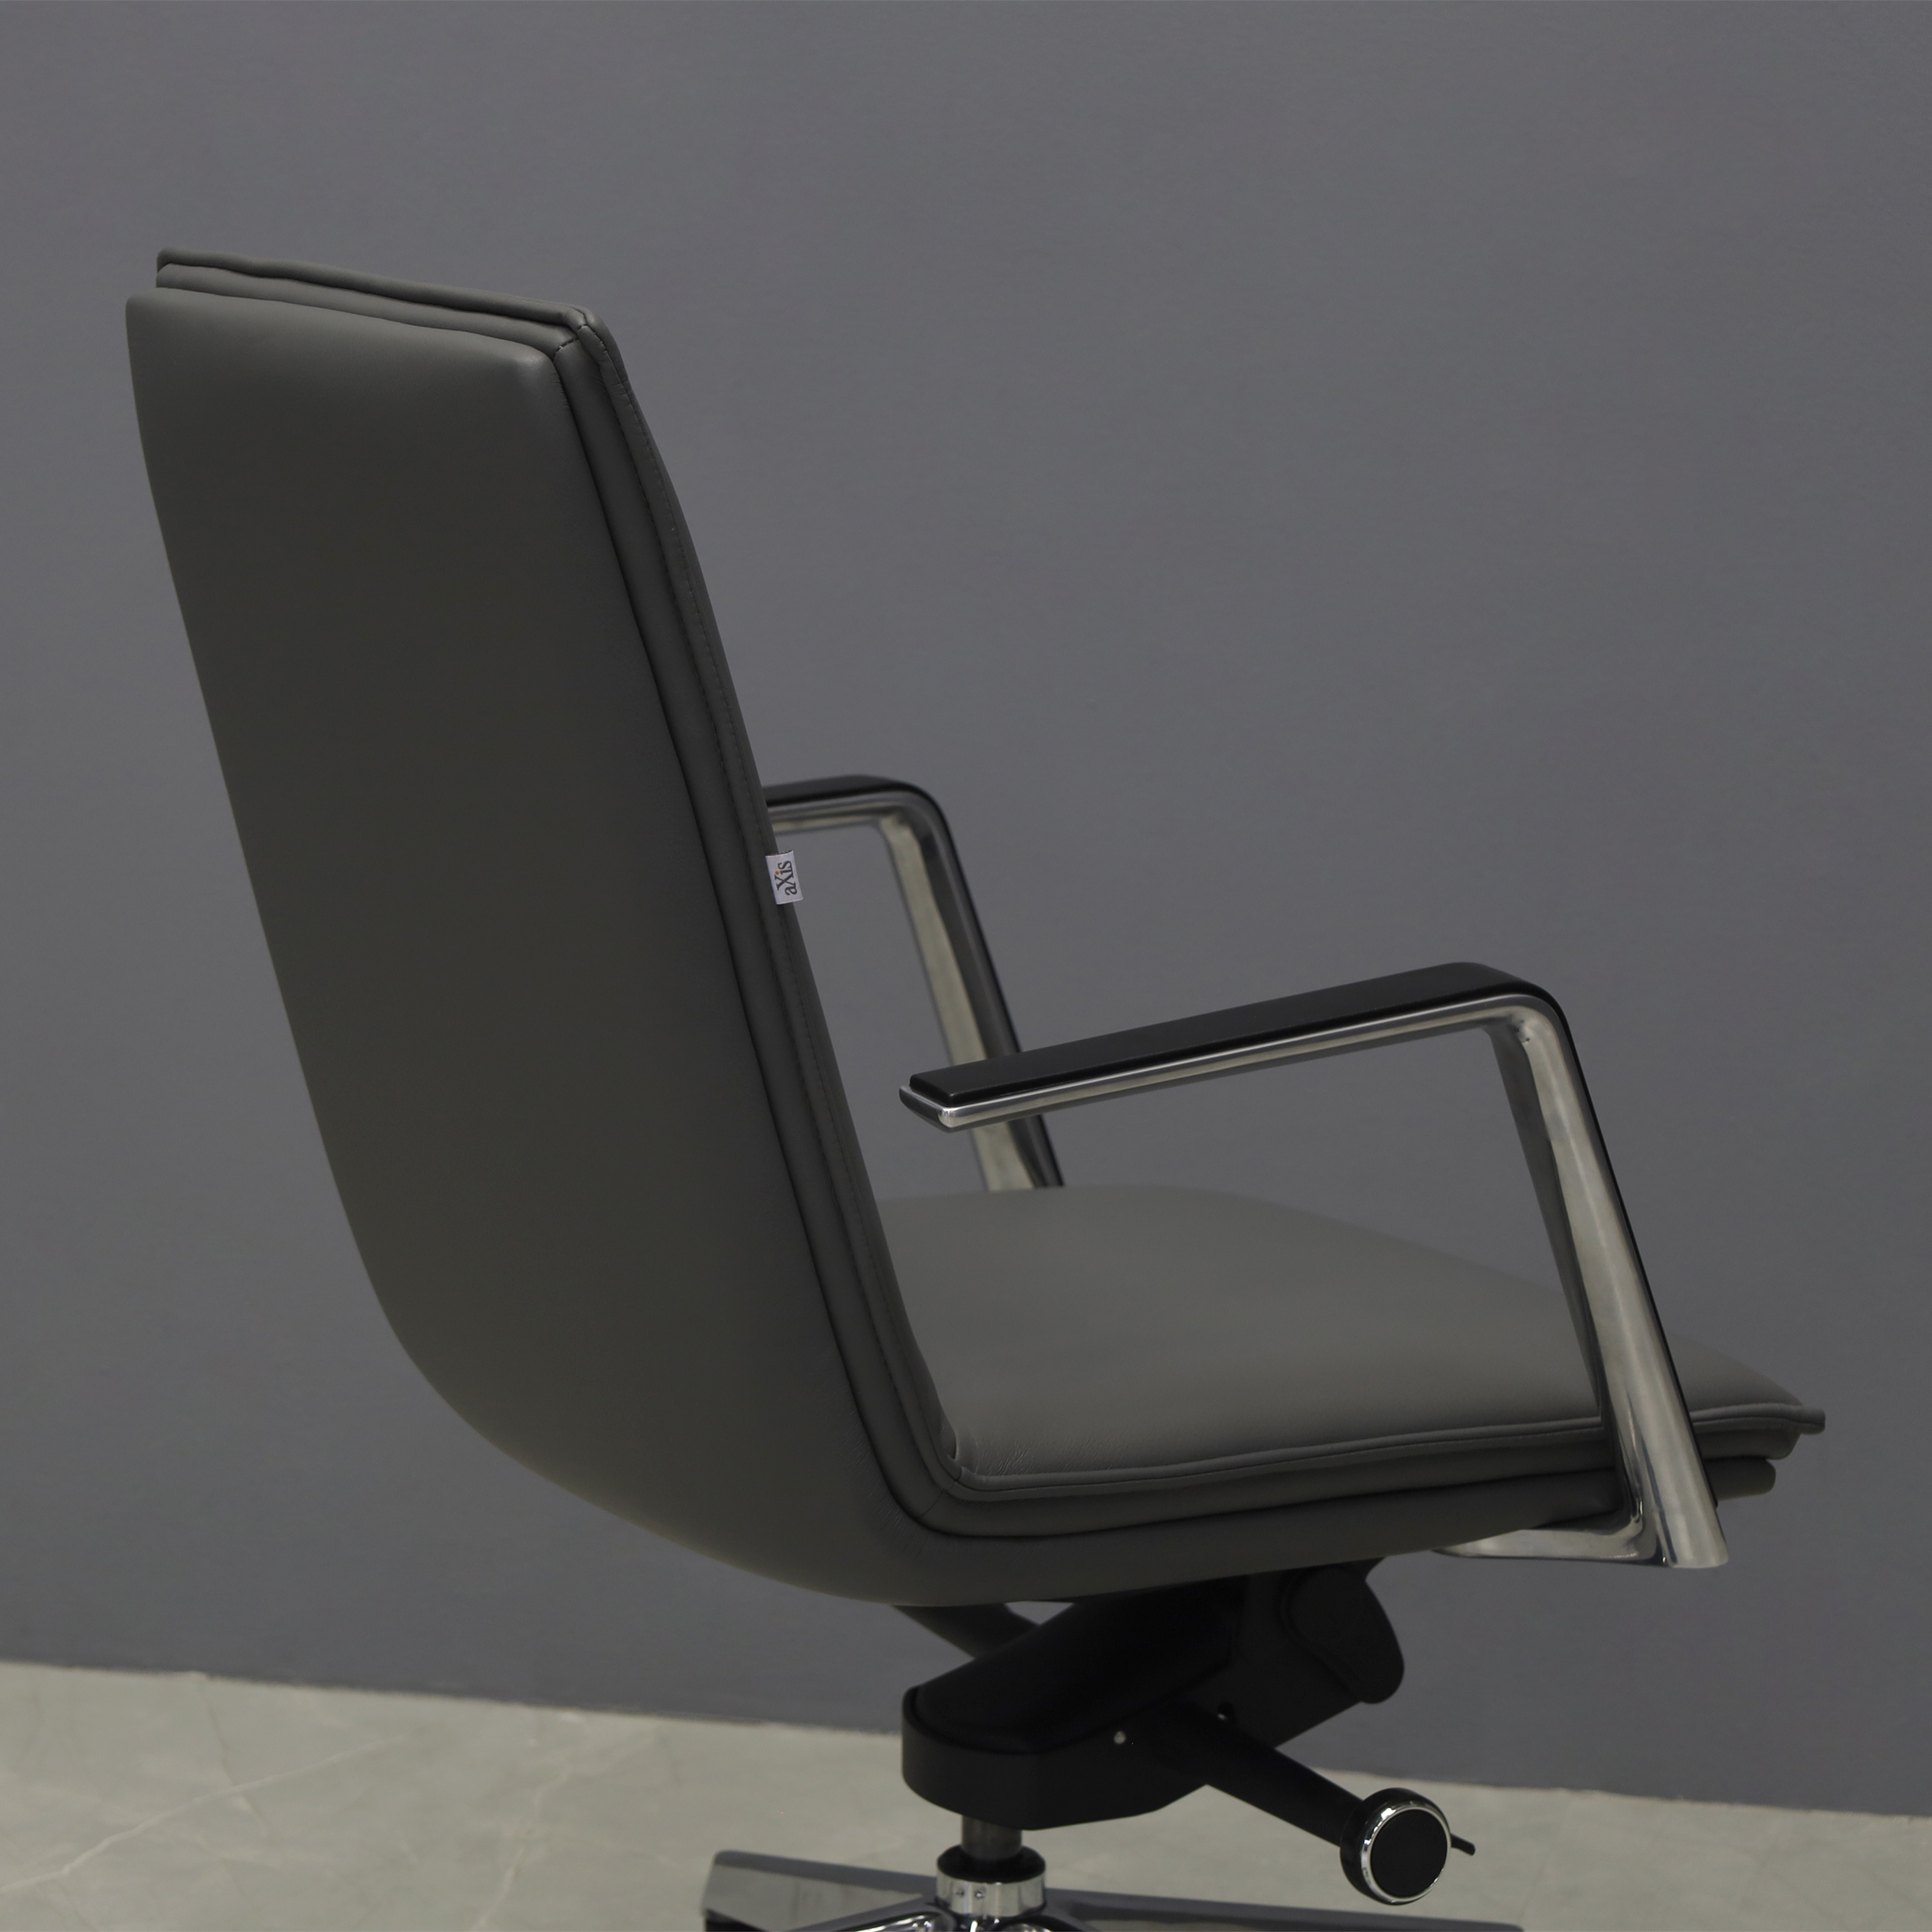 Casoni Conference and Task Chair in gray upholstey, shown here.